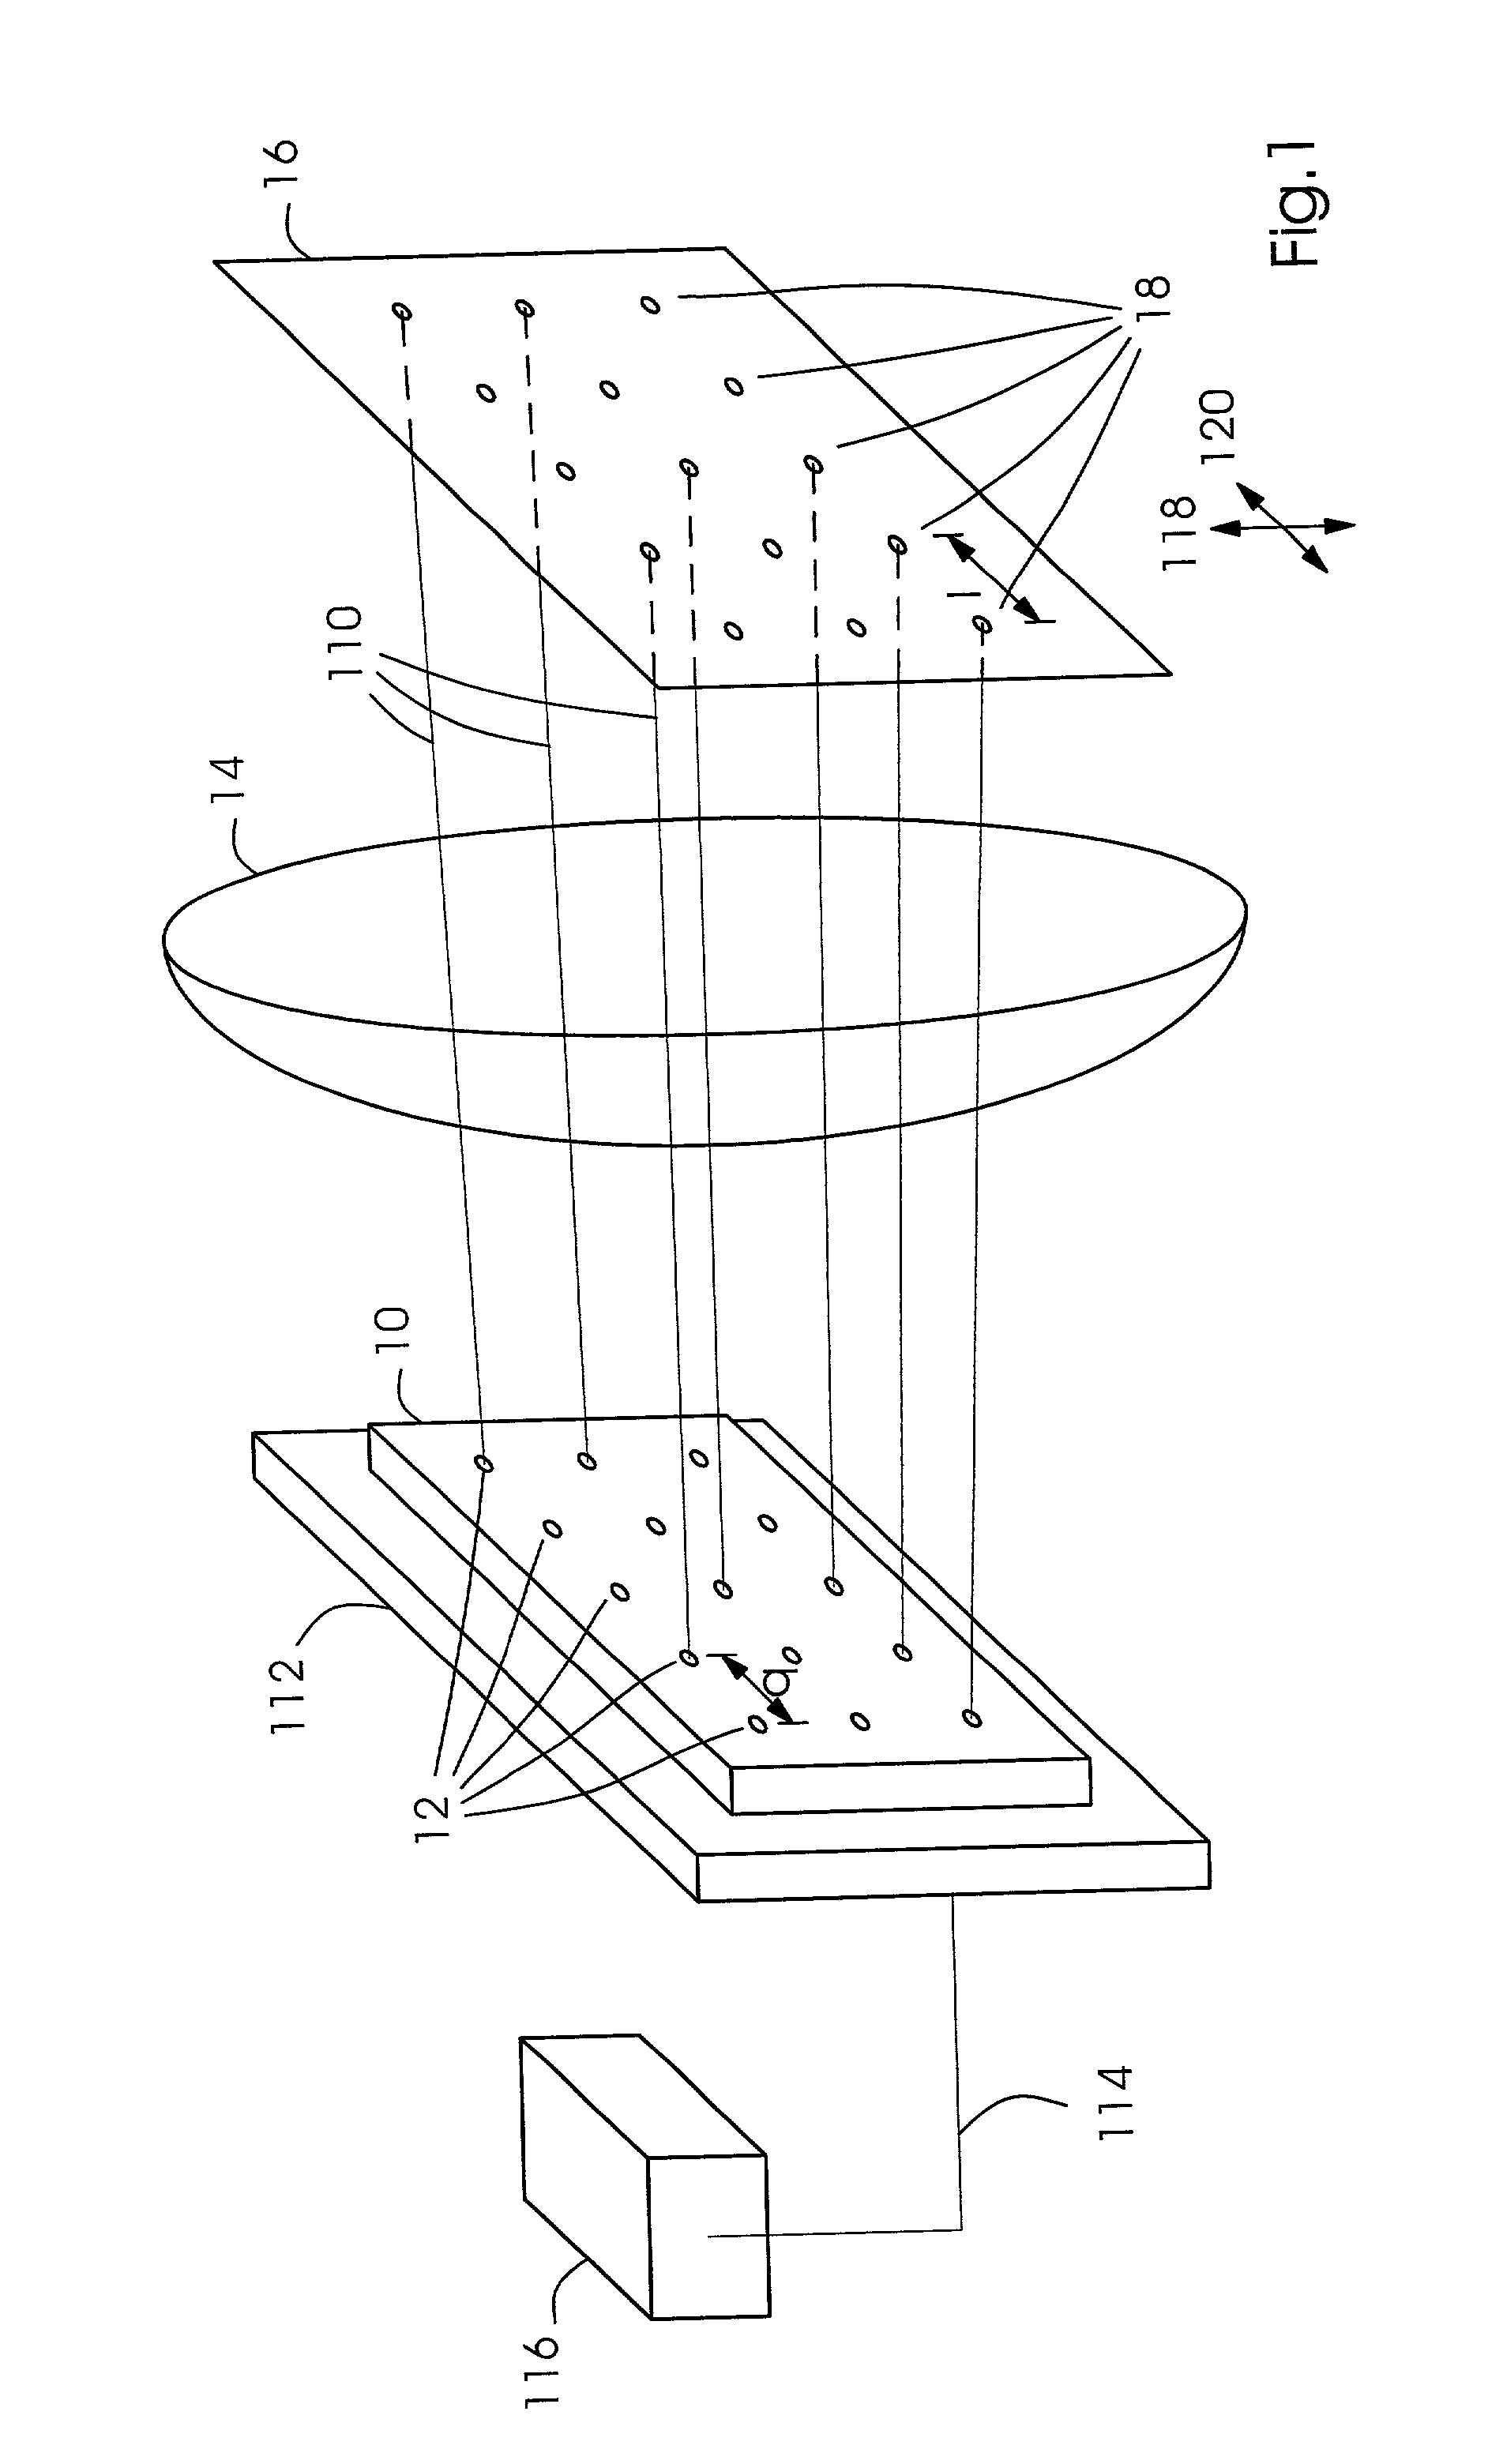 Image-recording device for a printing form, having an array of VCSEL light sources